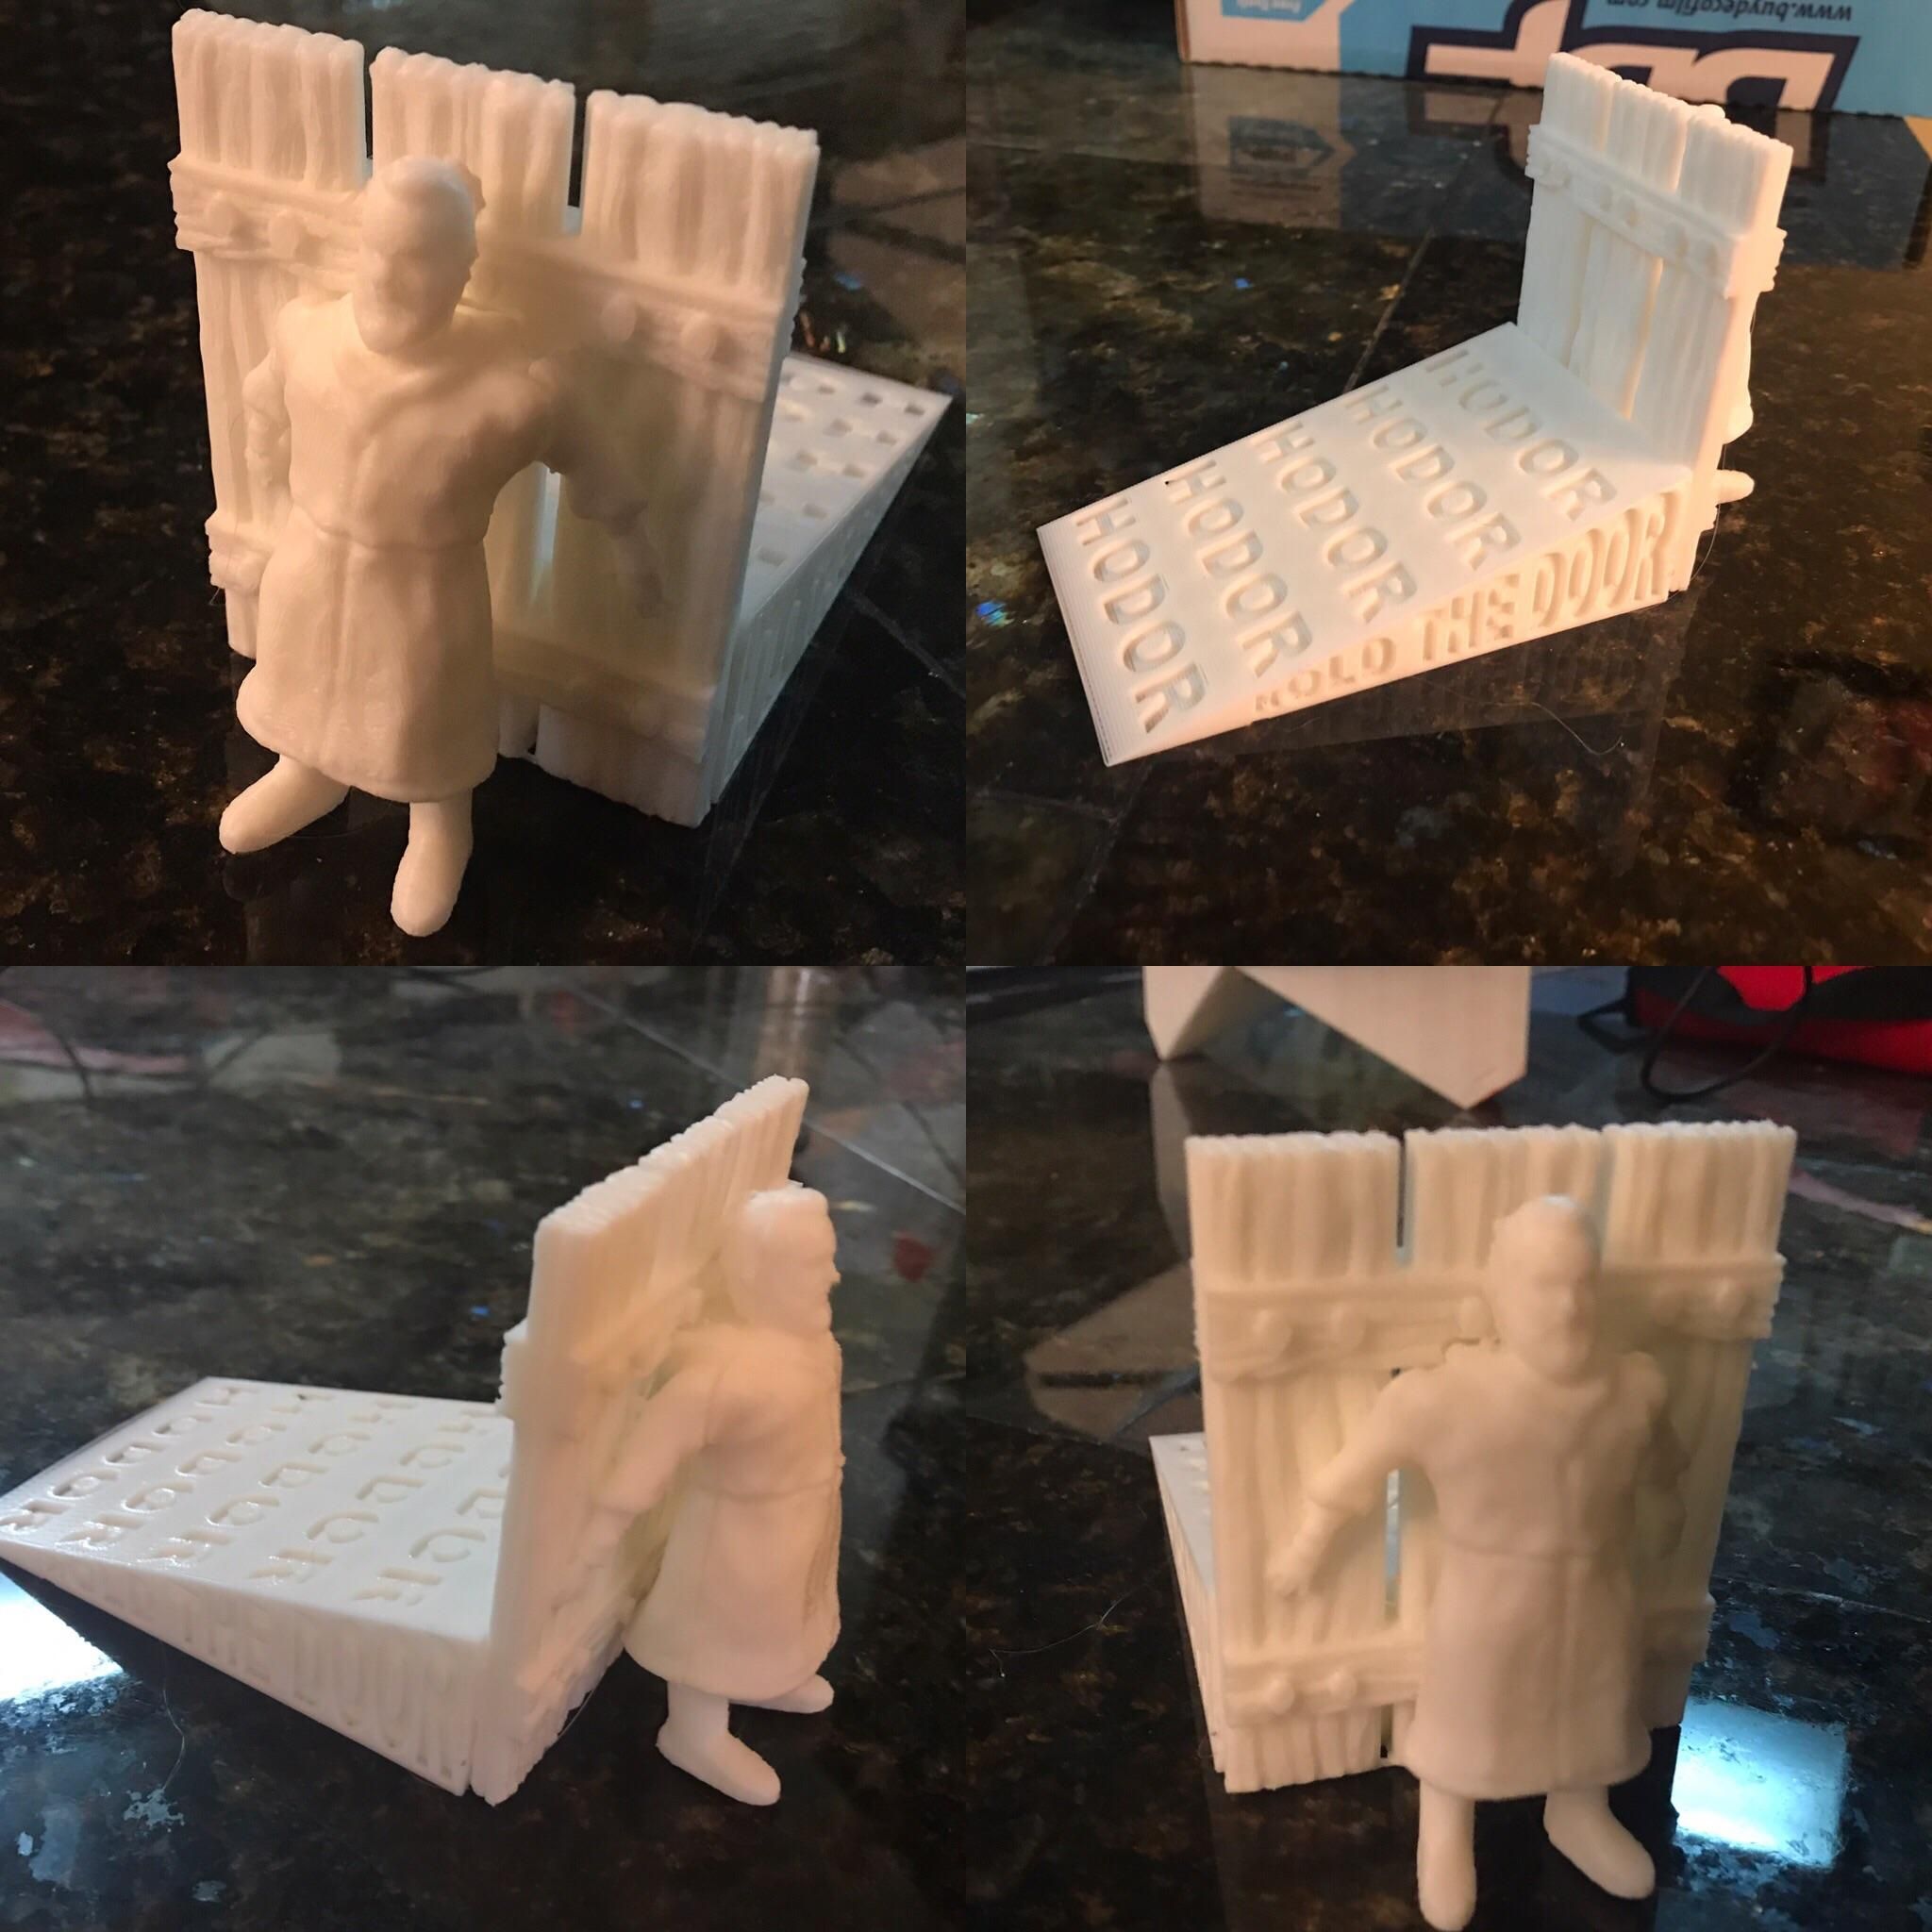 Another doorstop I printed for a buddy.